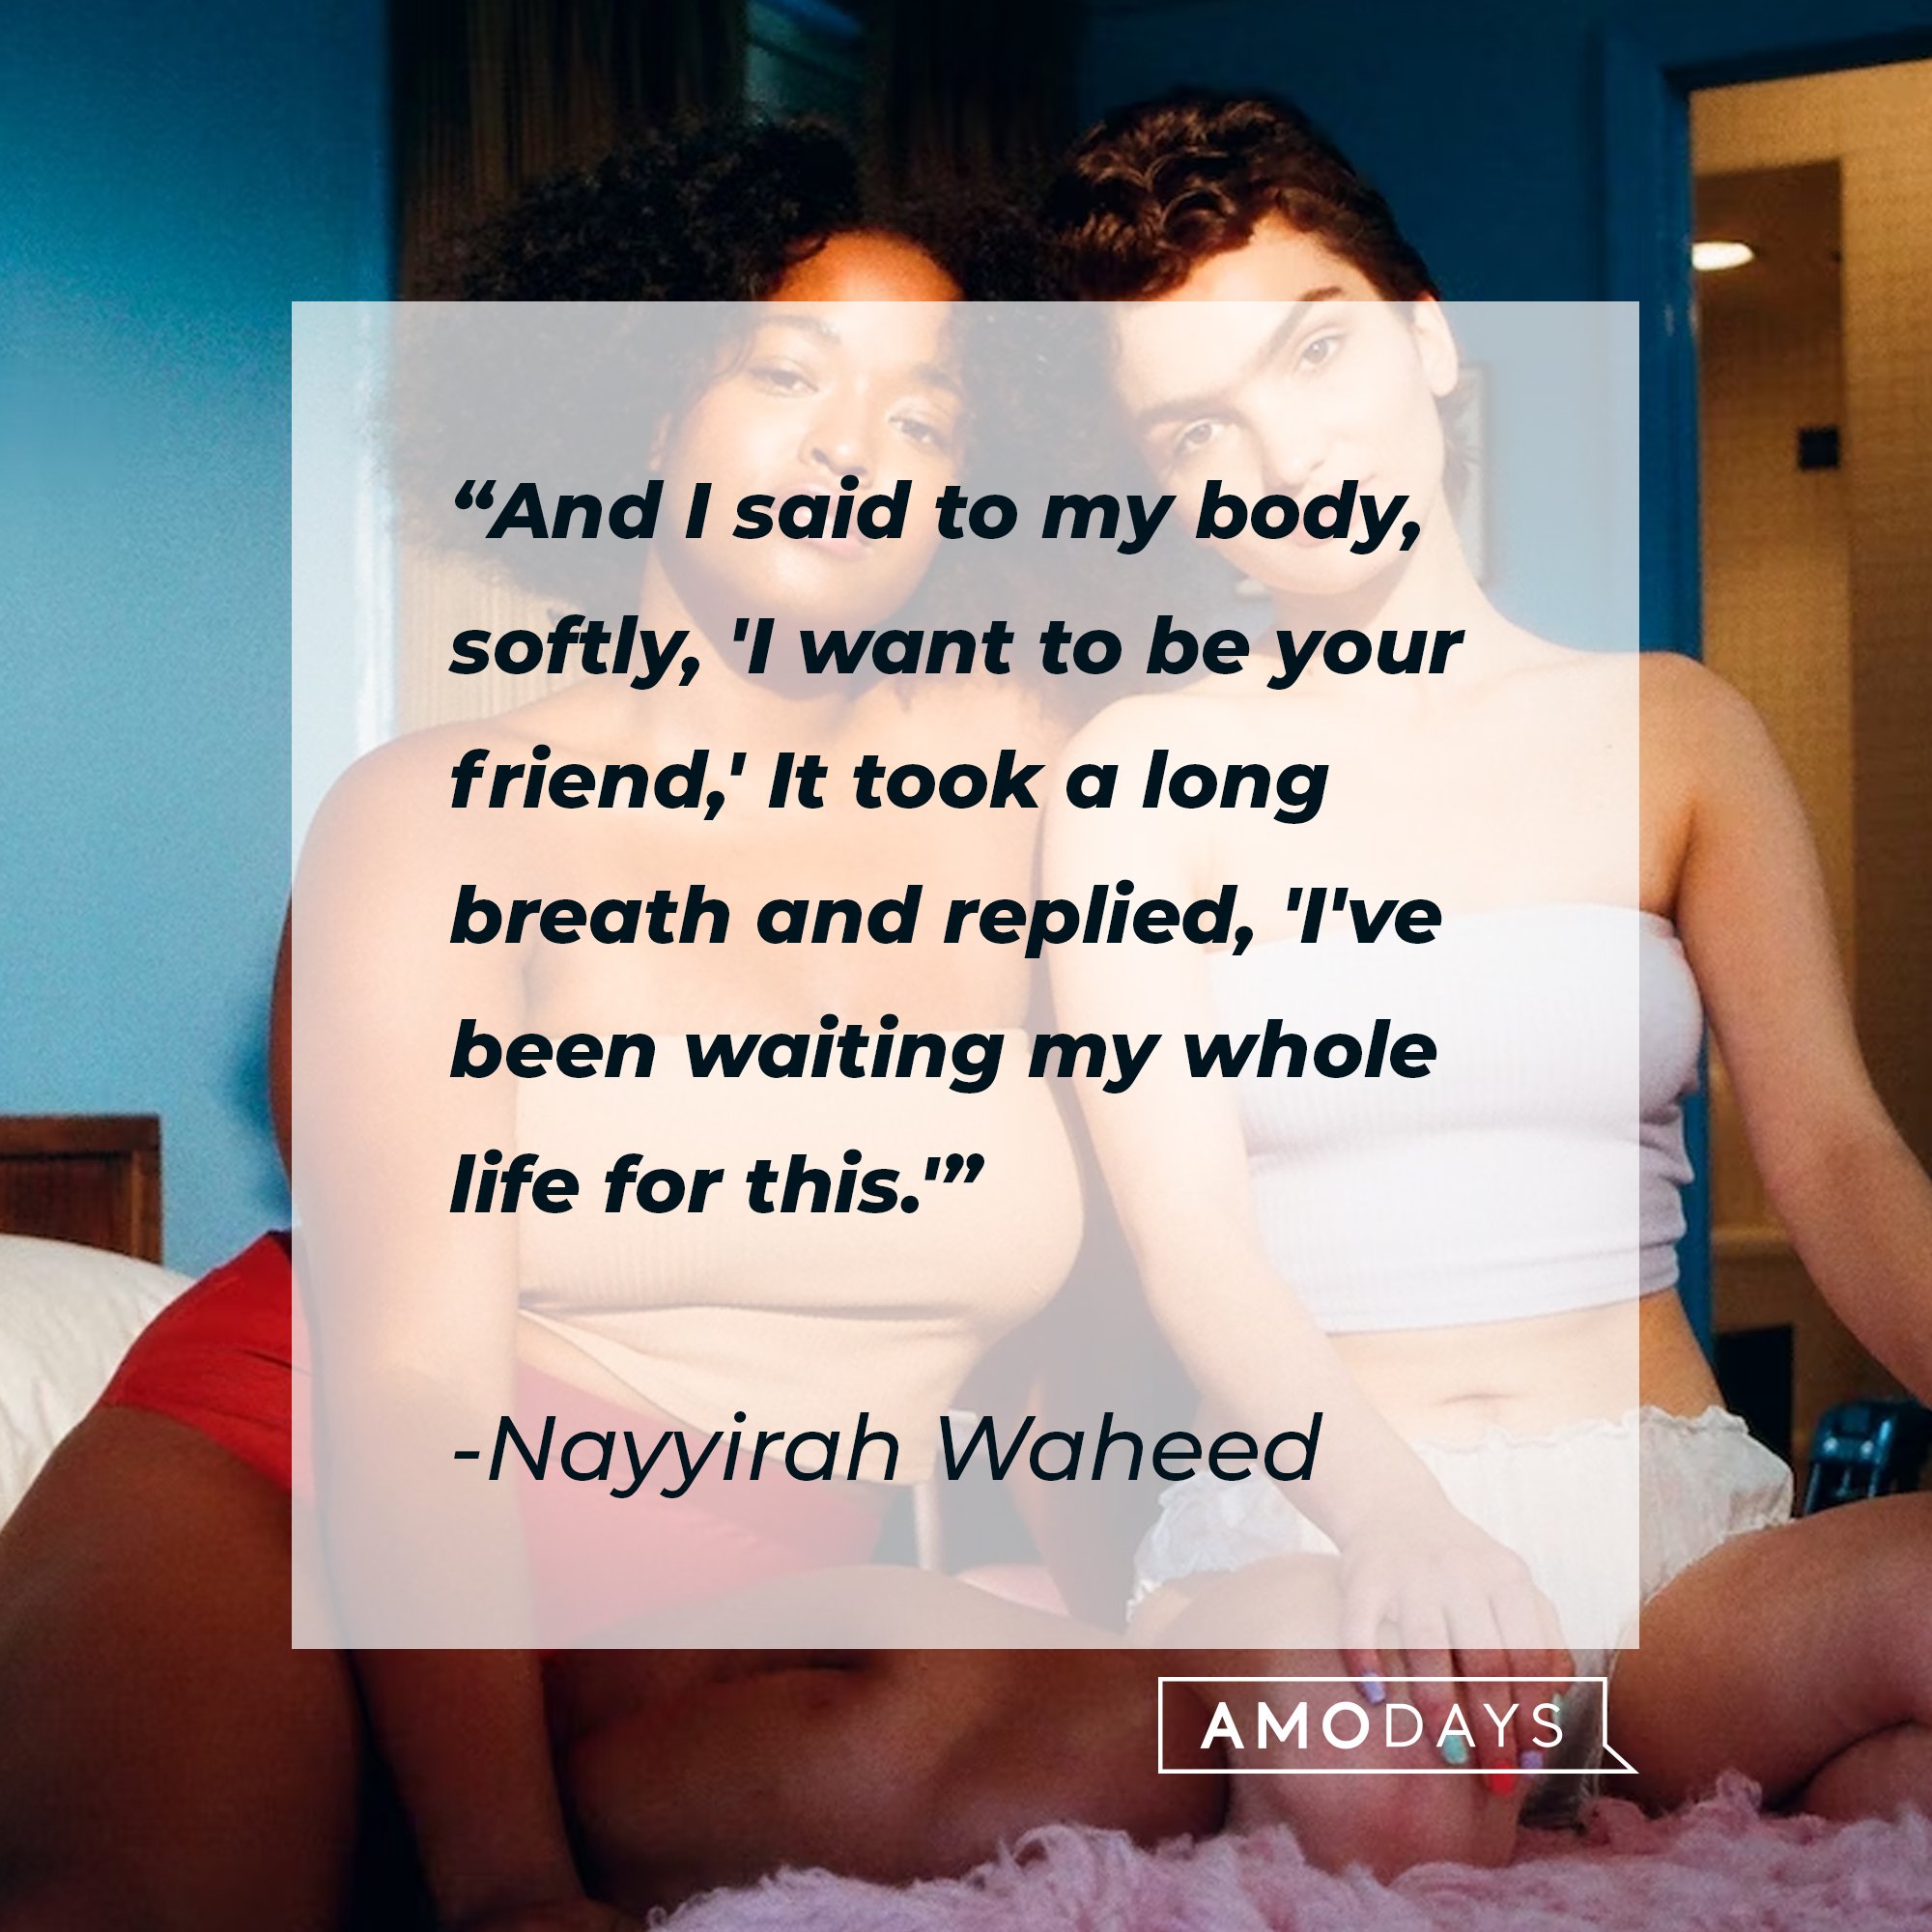 Nayyirah Waheed’s quote: "And I said to my body, softly, 'I want to be your friend,' It took a long breath and replied, 'I've been waiting my whole life for this.'" | Image: AmoDays